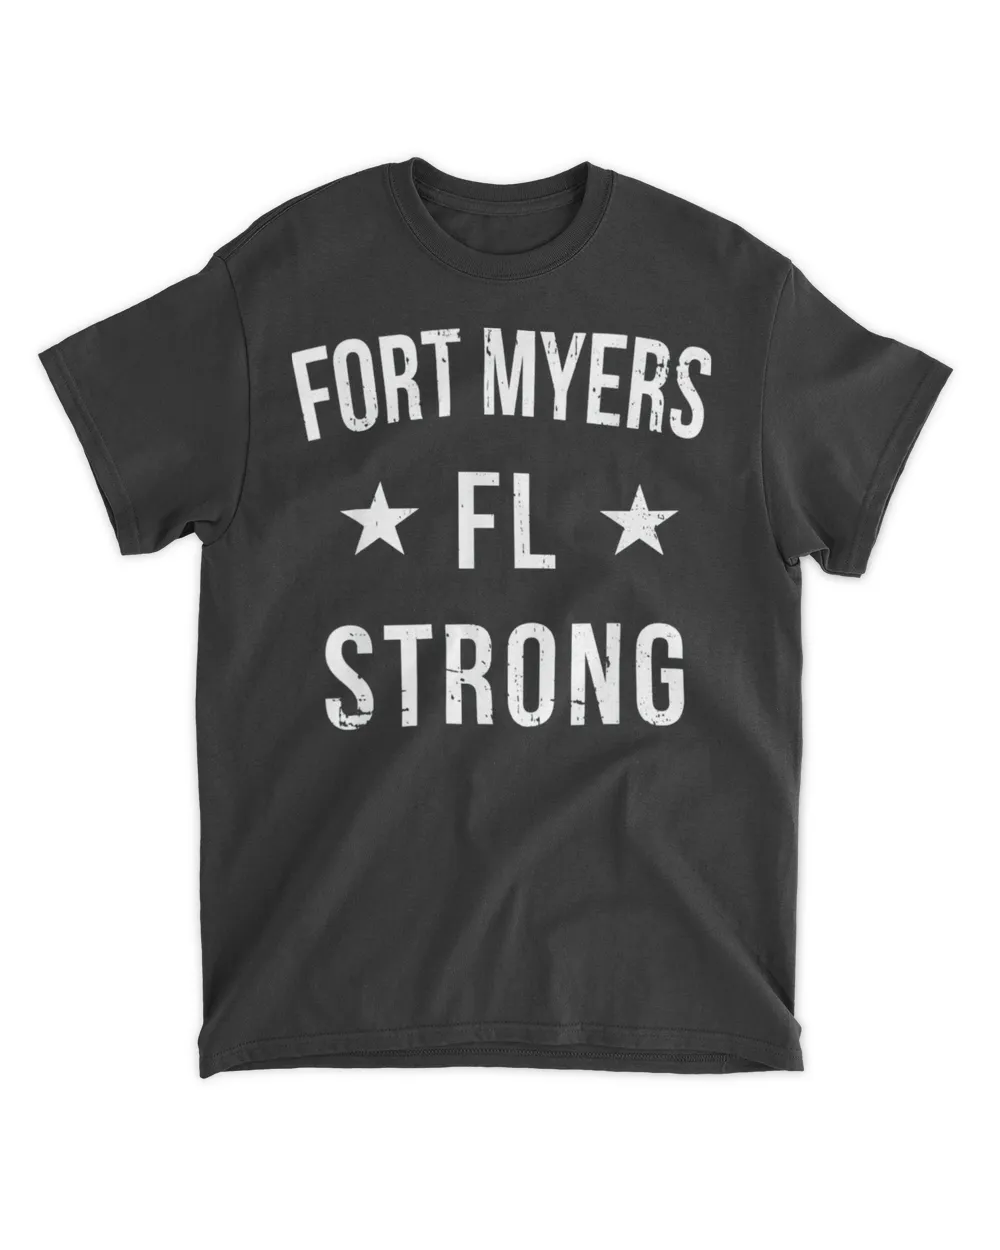 Fort myers Florida strong community strength prayer support shirt